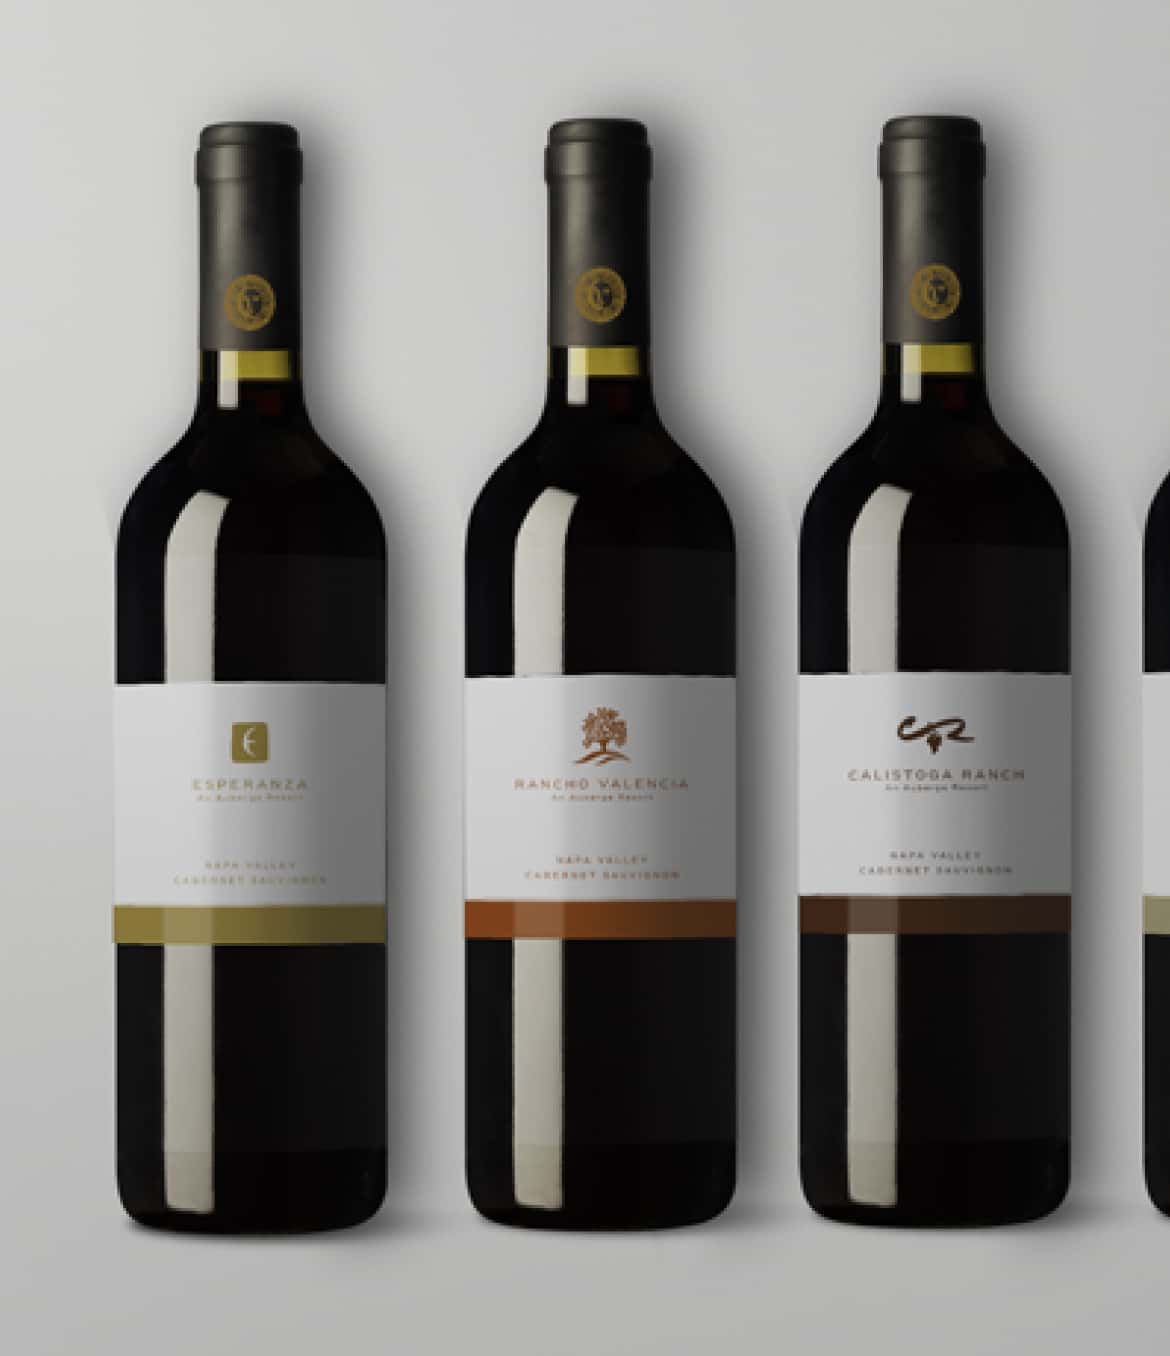 Three identical bottles of 'Calistoga Ranch Cabernet Sauvignon' wine lined up, each with a label showing the resort logo and vineyard details.